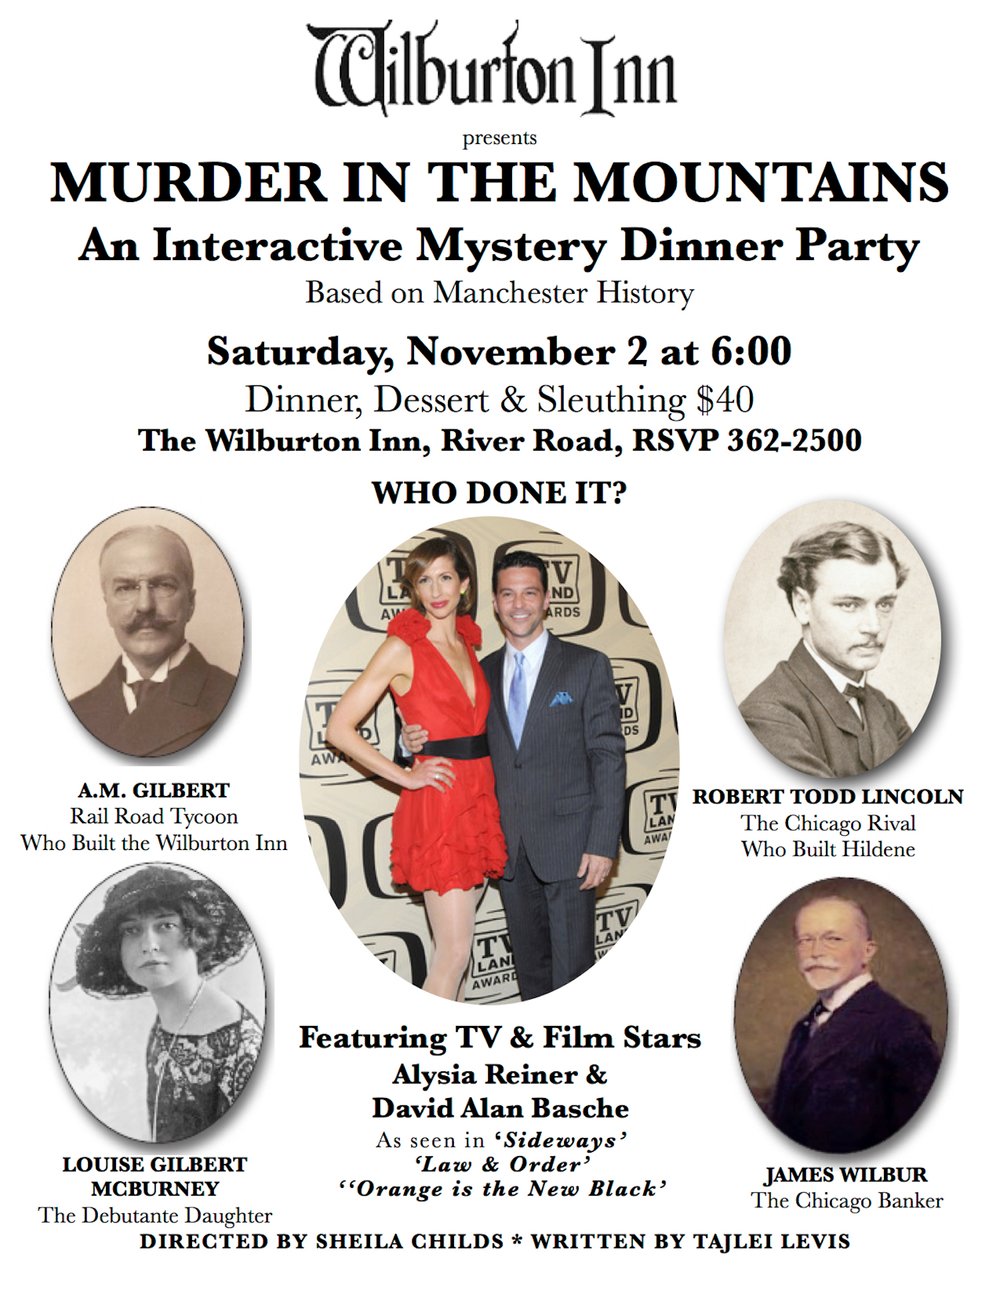 Murder in the Moutains 2013.jpg